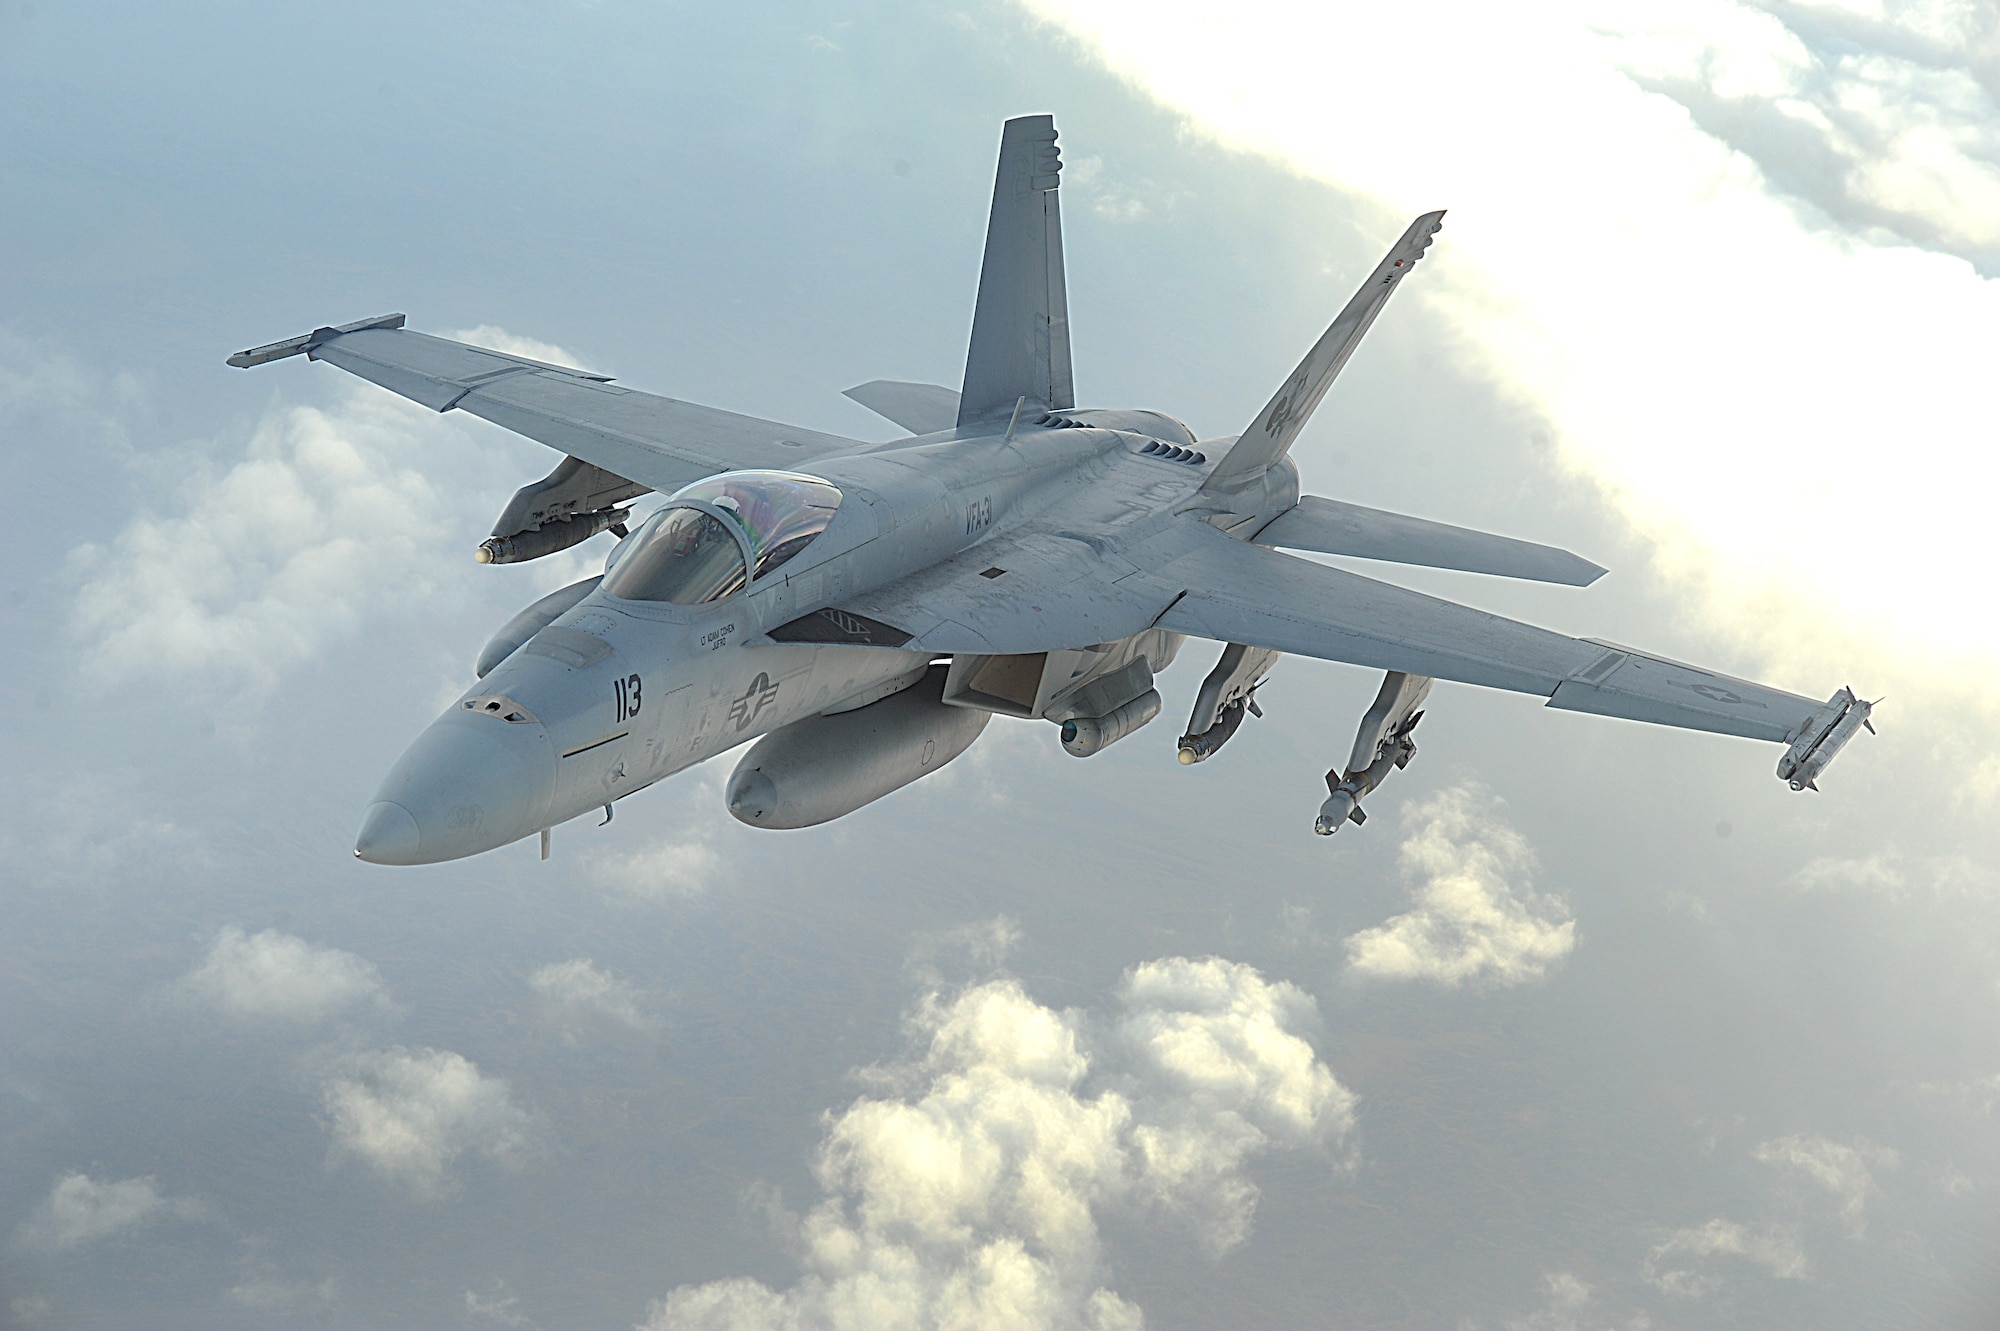 A U.S. Navy F/A-18 Super Hornet flies a combat patrol over in Afghanistan on Dec. 15. Aircraft such as these provide close-air support for ground forces in need. (U.S. Air Force photo/Staff Sgt. Aaron Allmon)